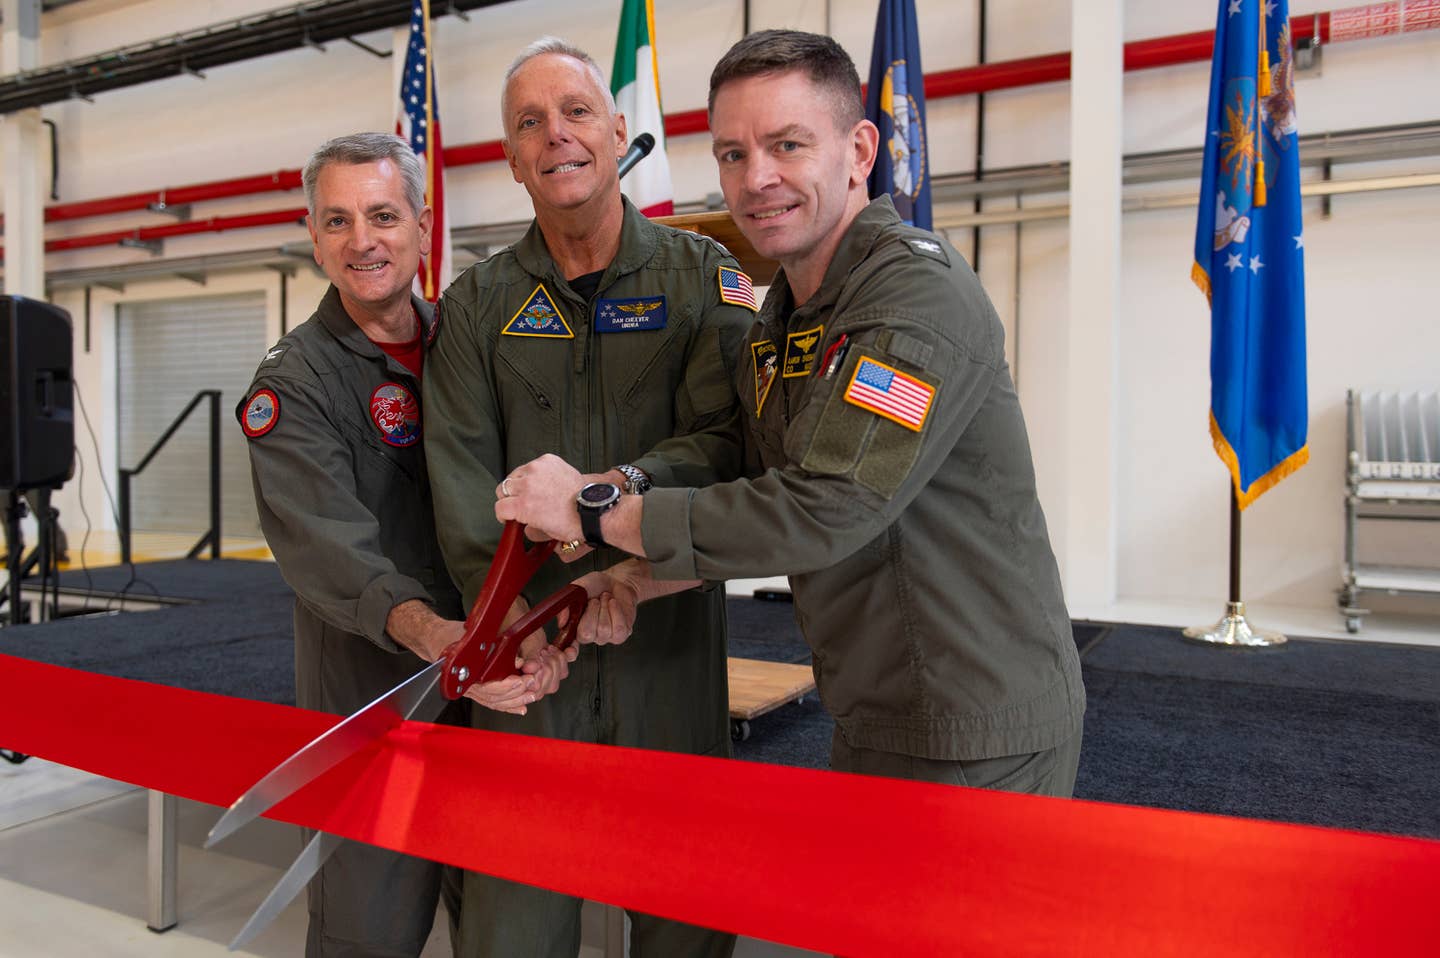 From left to right, VUP-19 commander Capt. Ronald H. Rumfelt, Jr., head of Naval Air Forces Vice Adm. Daniel “Undra” Cheever, Commander, and commander of NAS Sigonella Capt. Aaron Shoemaker cut a ceremonial ribbon in a new hangar at the base in Italy dedicated to supporting MQ-4C operations during a ceremony on March 2, 2024. <em>USN</em>